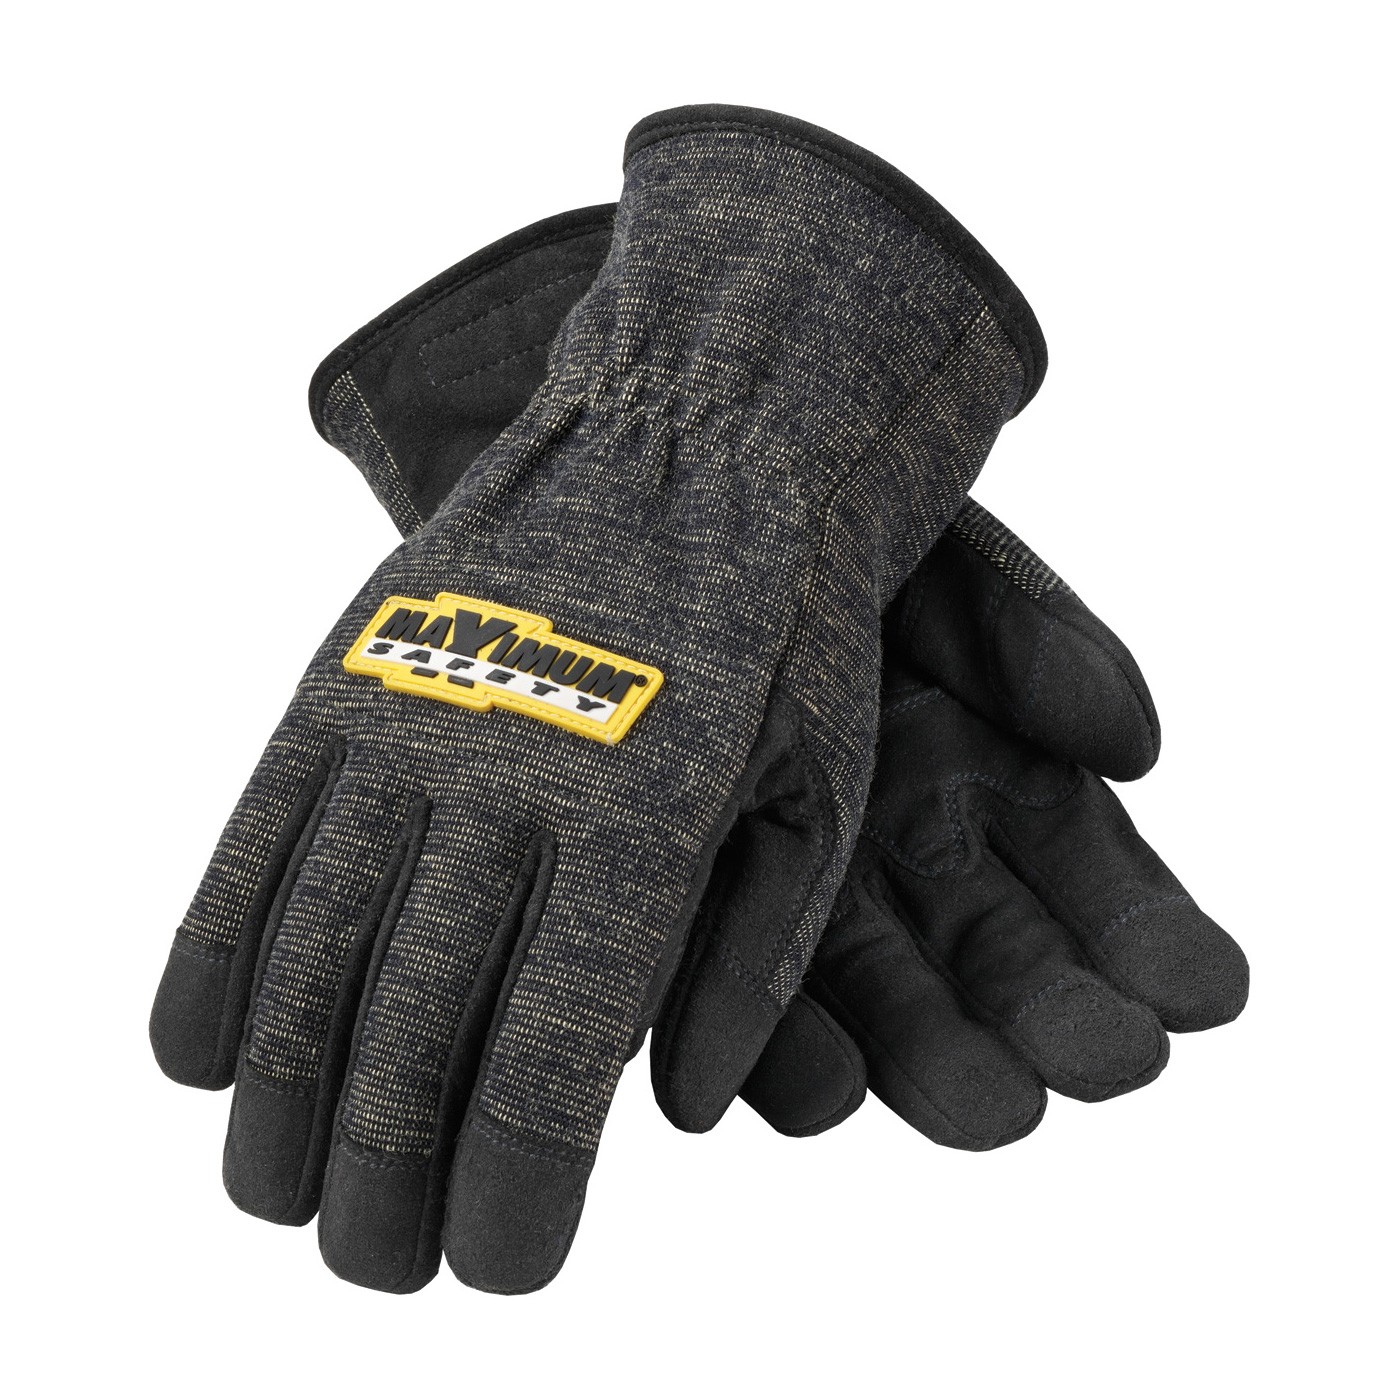 FR Treated Synthetic Leather Glove, Kevlar Lined, Reinforced Palm Size 3X-Large